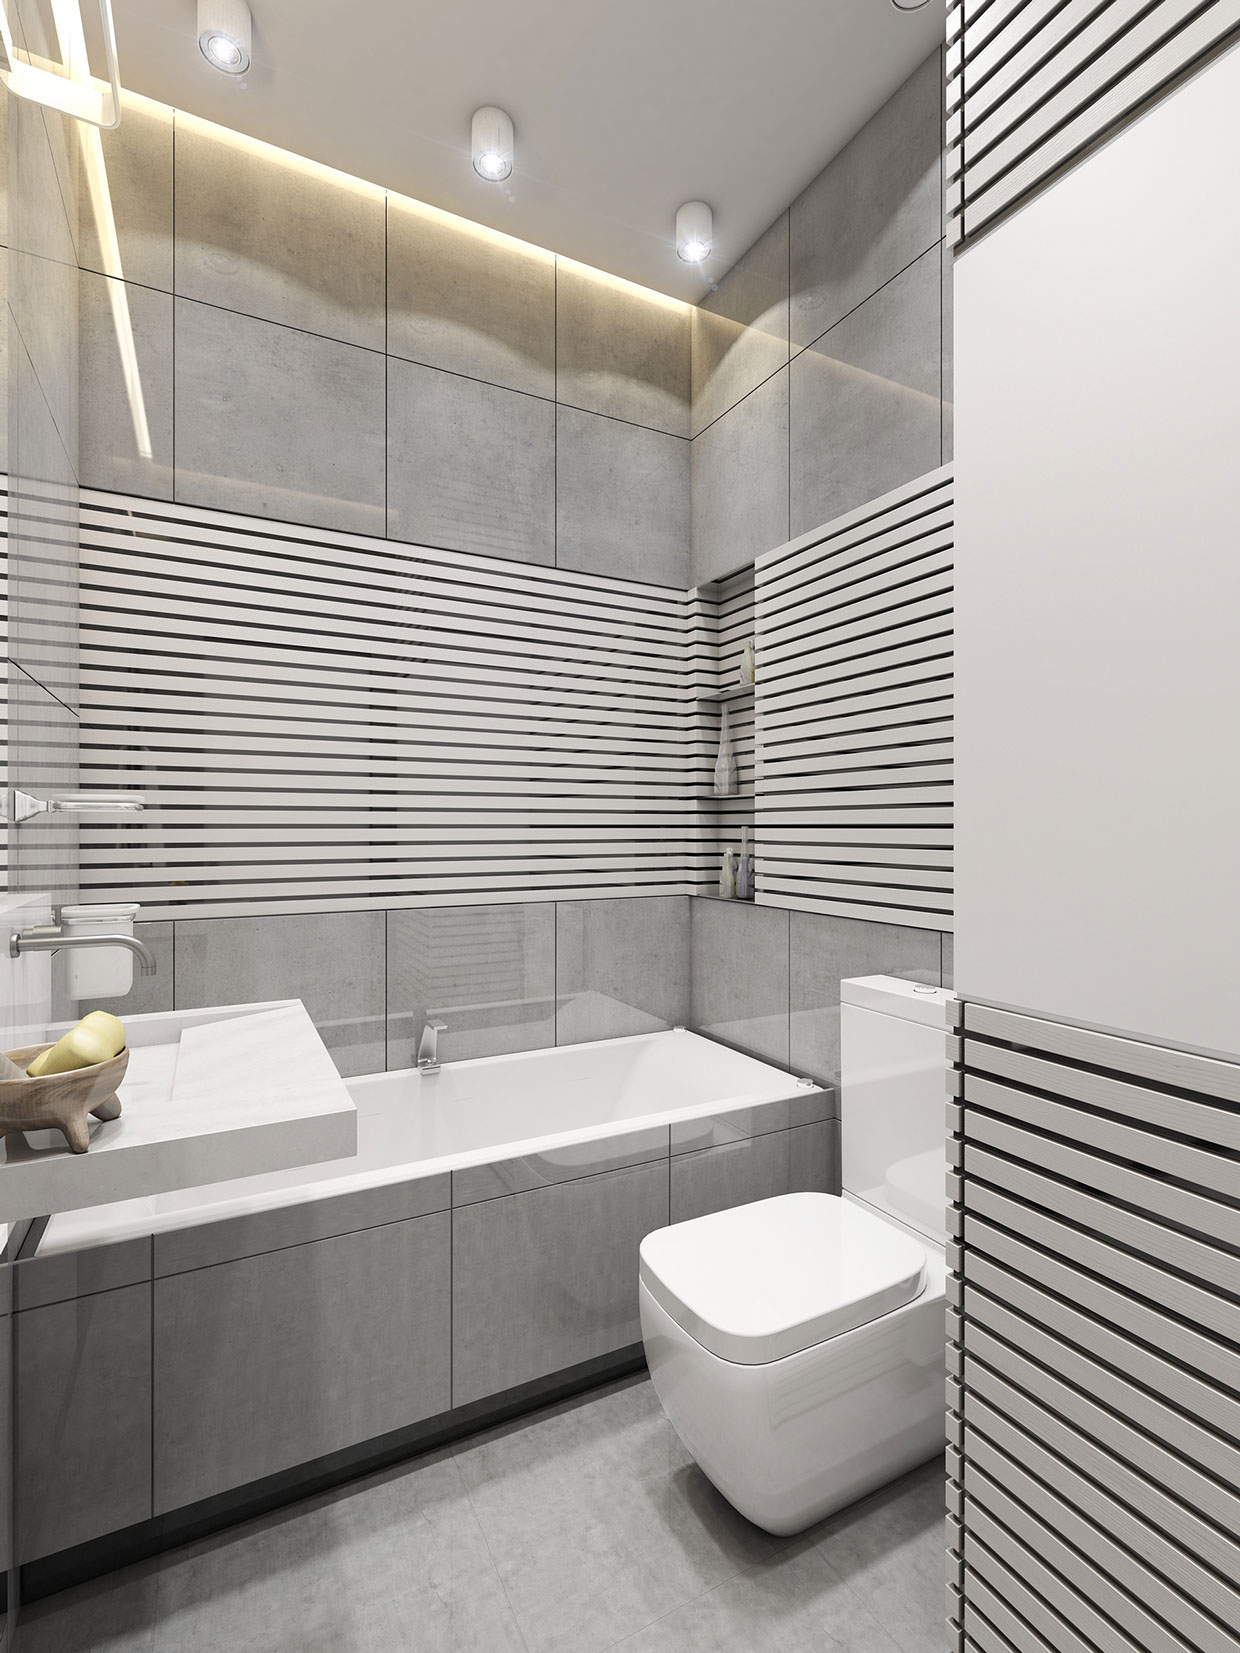 small modern bathroom "width =" 1240 "height =" 1653 "srcset =" https://mileray.com/wp-content/uploads/2020/05/1588515260_548_Small-Bathroom-Design-Ideas-With-Awesome-Decoration-Which-Looks-So.jpg 1240w, https: //mileray.com/wp-content/uploads/2016/09/small-modern-bathroom-Konstantin-Entalecev-225x300.jpg 225w, https://mileray.com/wp-content/uploads/2016/09/small -modern-bad-Konstantin-Entalecev-768x1024.jpg 768w, https://mileray.com/wp-content/uploads/2016/09/small-modern-bathroom-Konstantin-Entalecev-696x928.jpg 696w, https: / /mileray.com/wp-content/uploads/2016/09/small-modern-bathroom-Konstantin-Entalecev-1068x1424.jpg 1068w, https://mileray.com/wp-content/uploads/2016/09/small- modern bathroom-Konstantin-Entalecev-315x420.jpg 315w "sizes =" (maximum width: 1240px) 100vw, 1240px